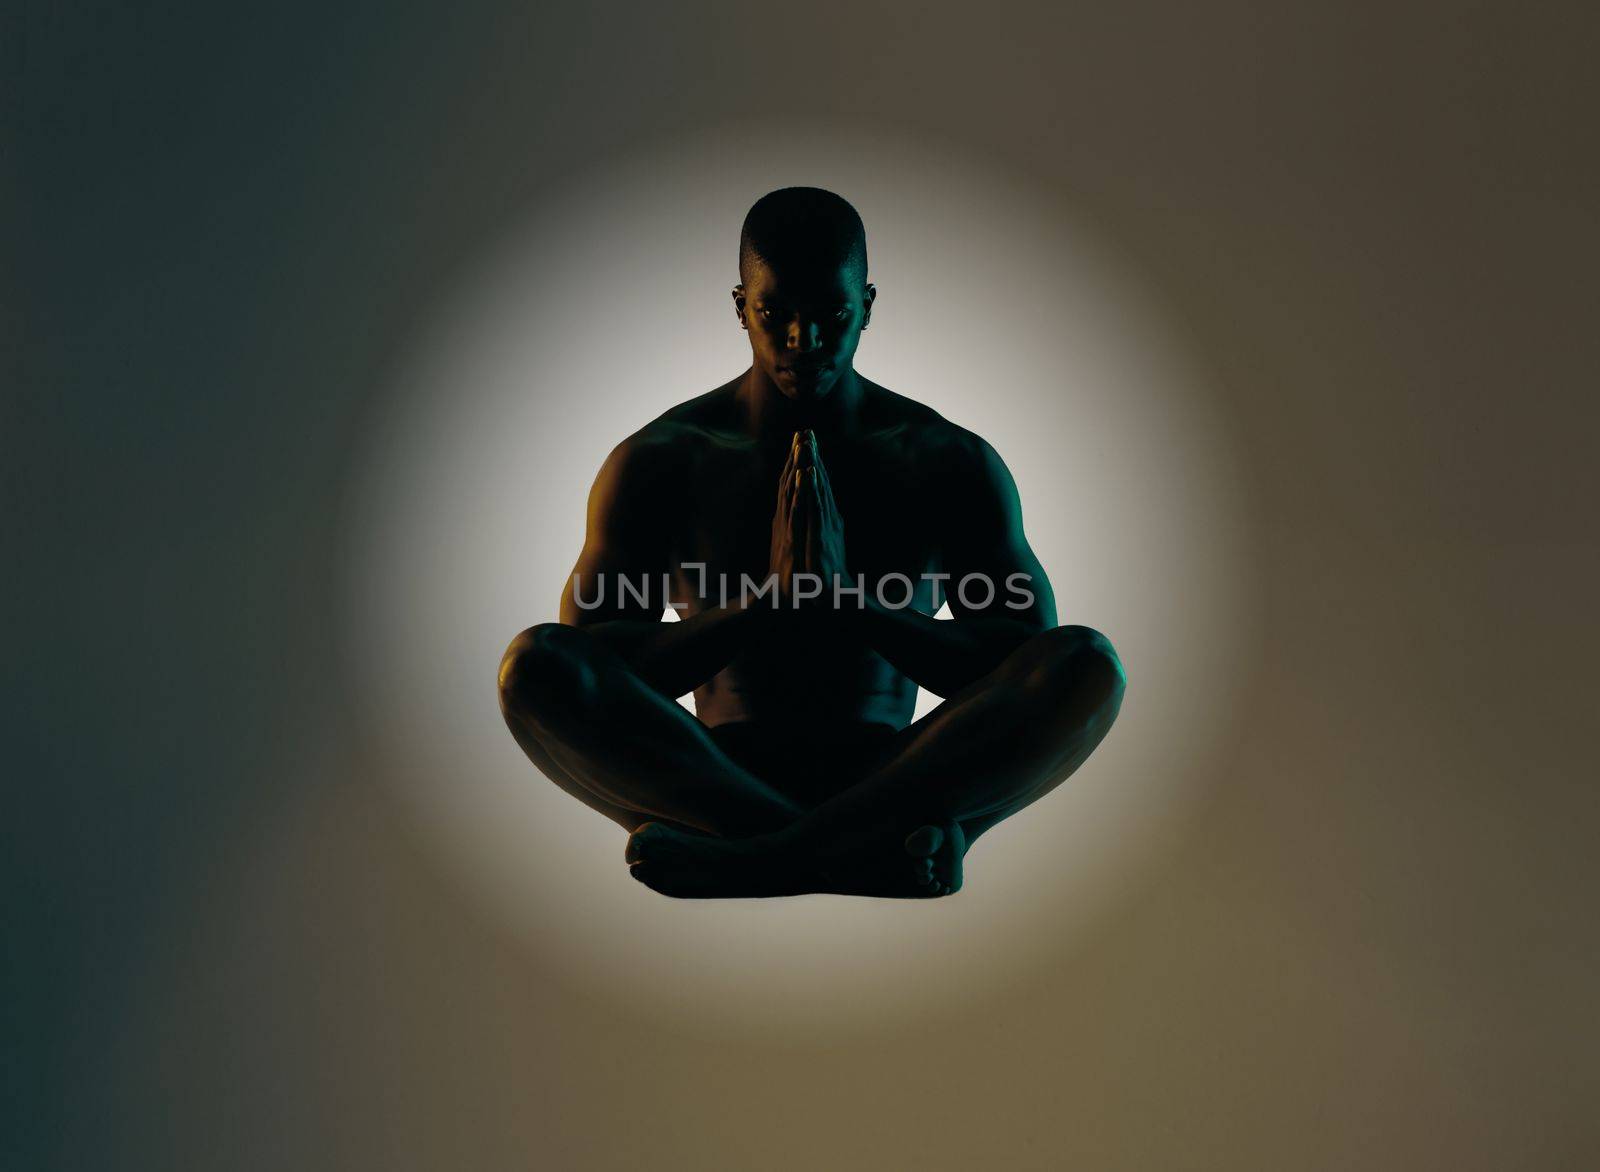 Meditation art, silhouette or relax man meditate for spiritual mental health, chakra energy balance or soul healing. Zen mindset peace, mindfulness or shadow model float isolated on studio background.